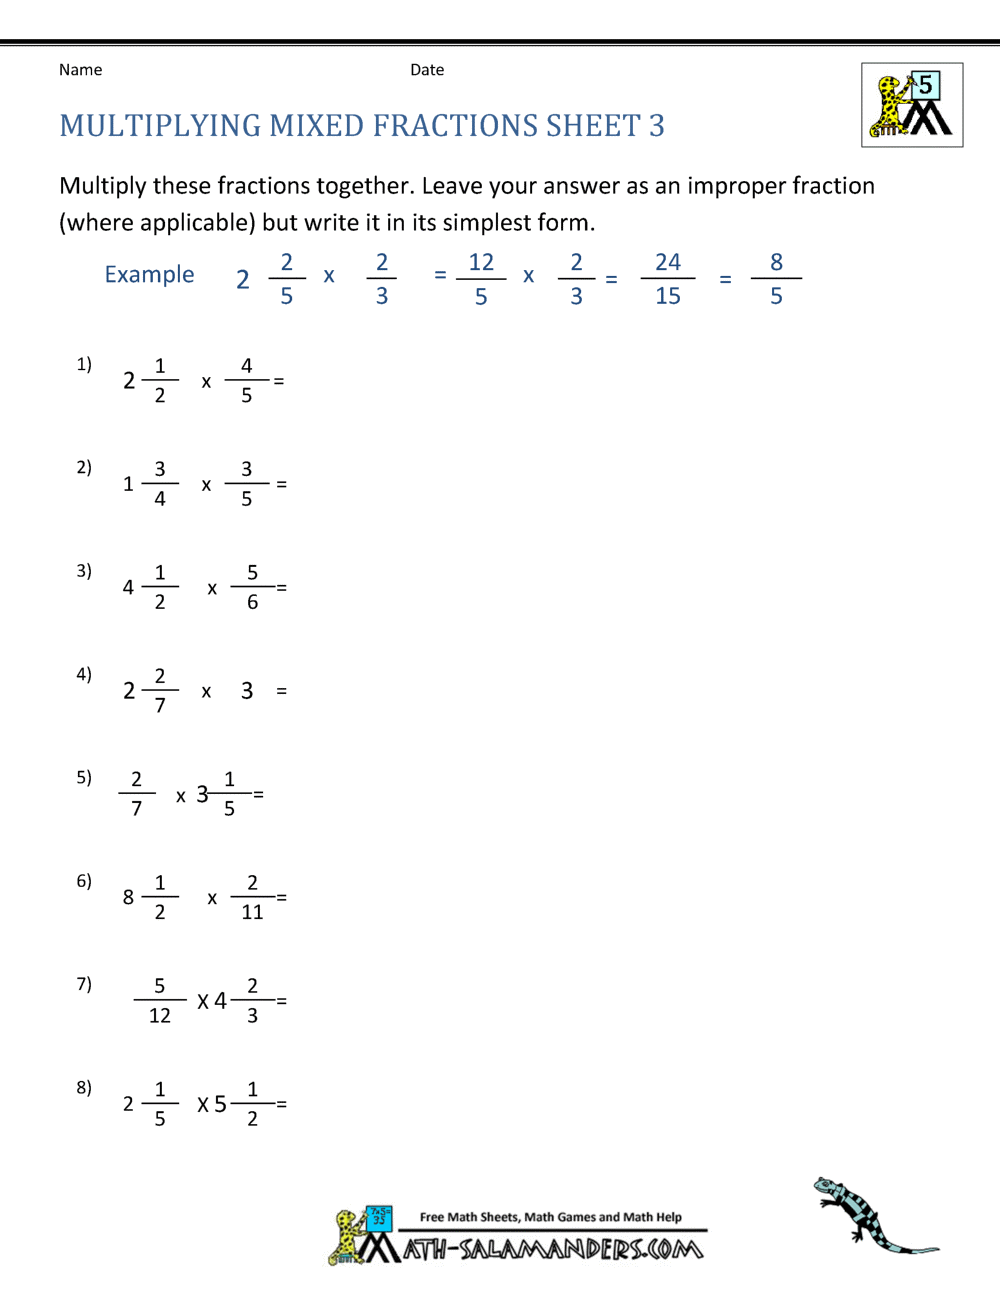 Converting Improper Fractions To Mixed Numbers Worksheets ...